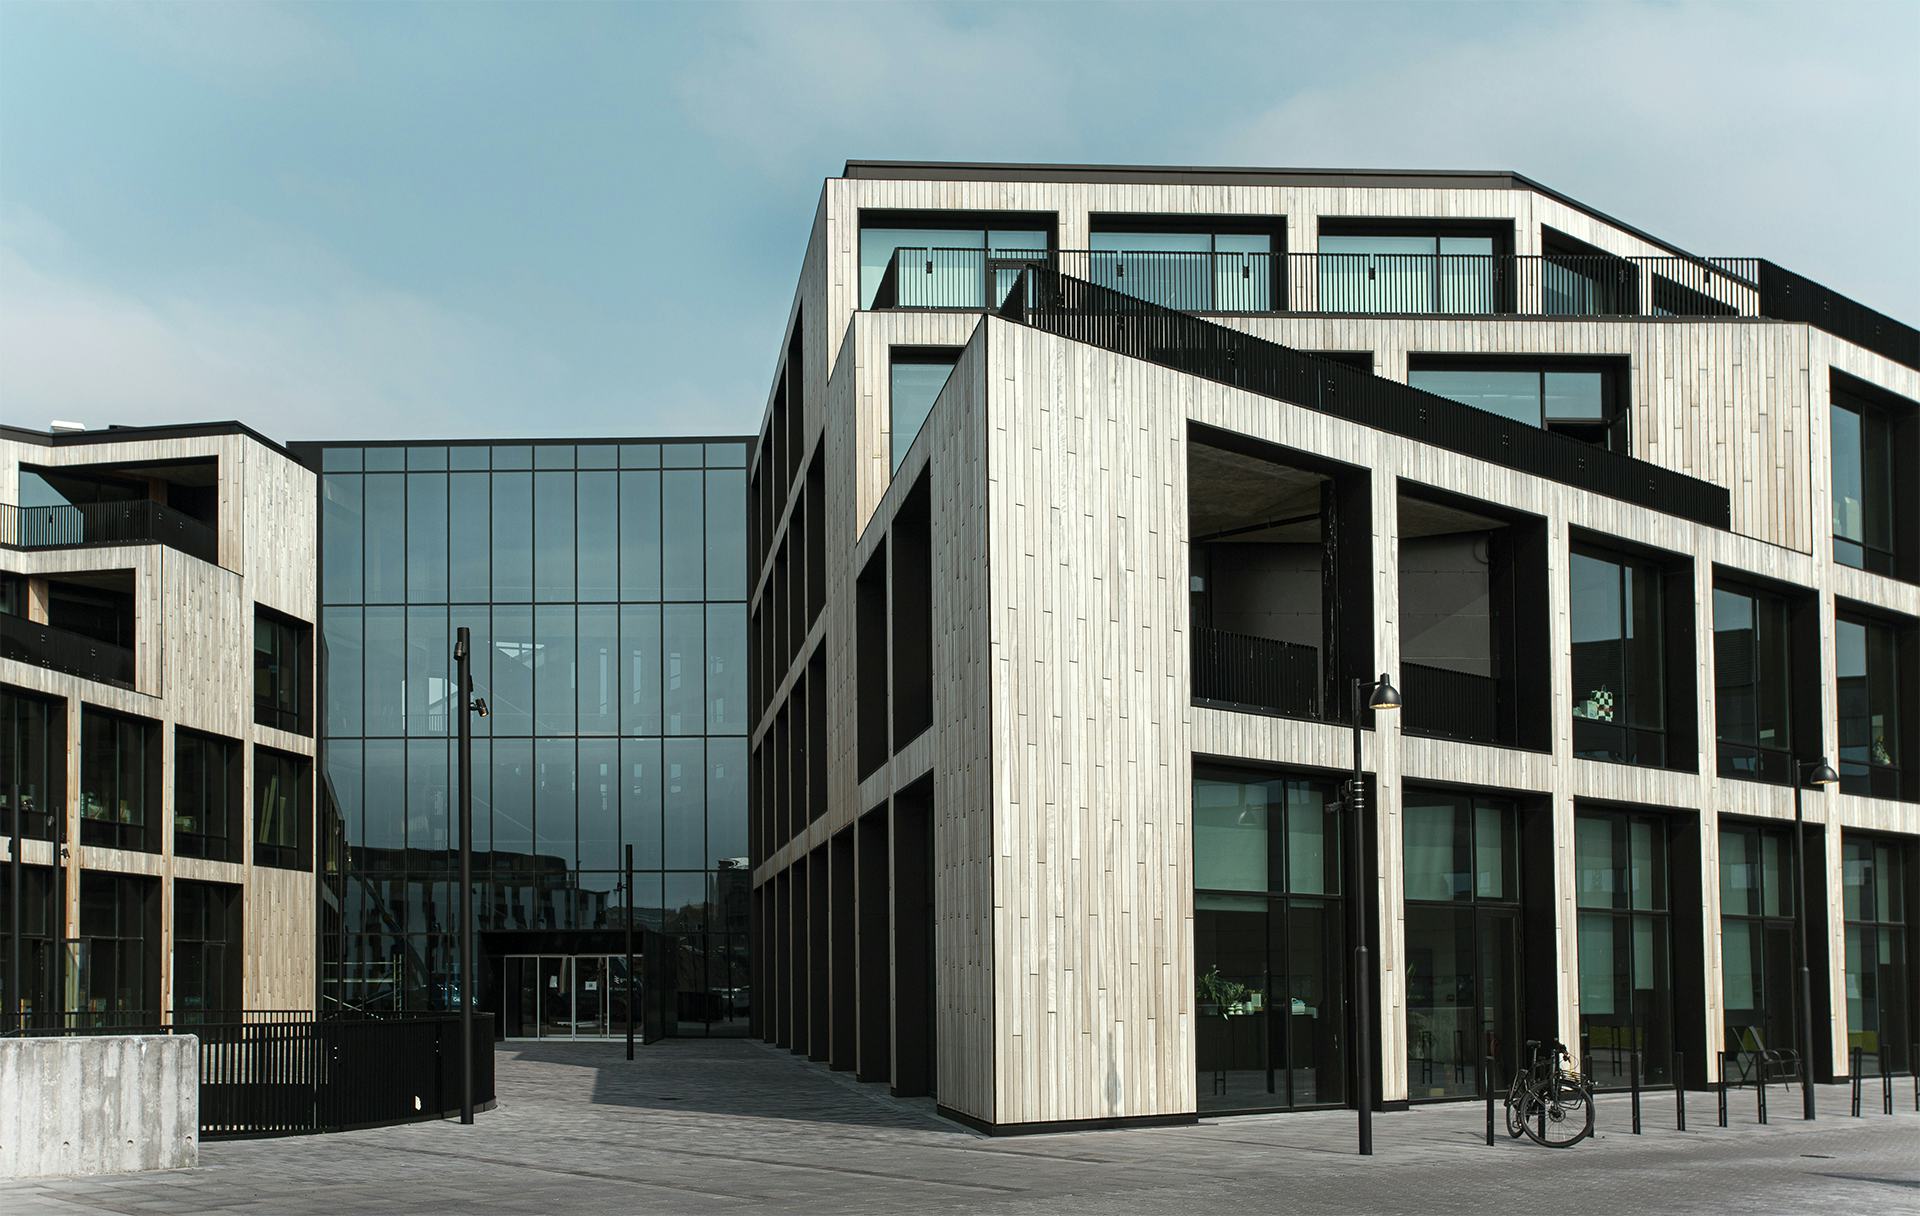 Looking at the front of a modern building with sharp corners. The building is made of wood and glass and stands on a paved square